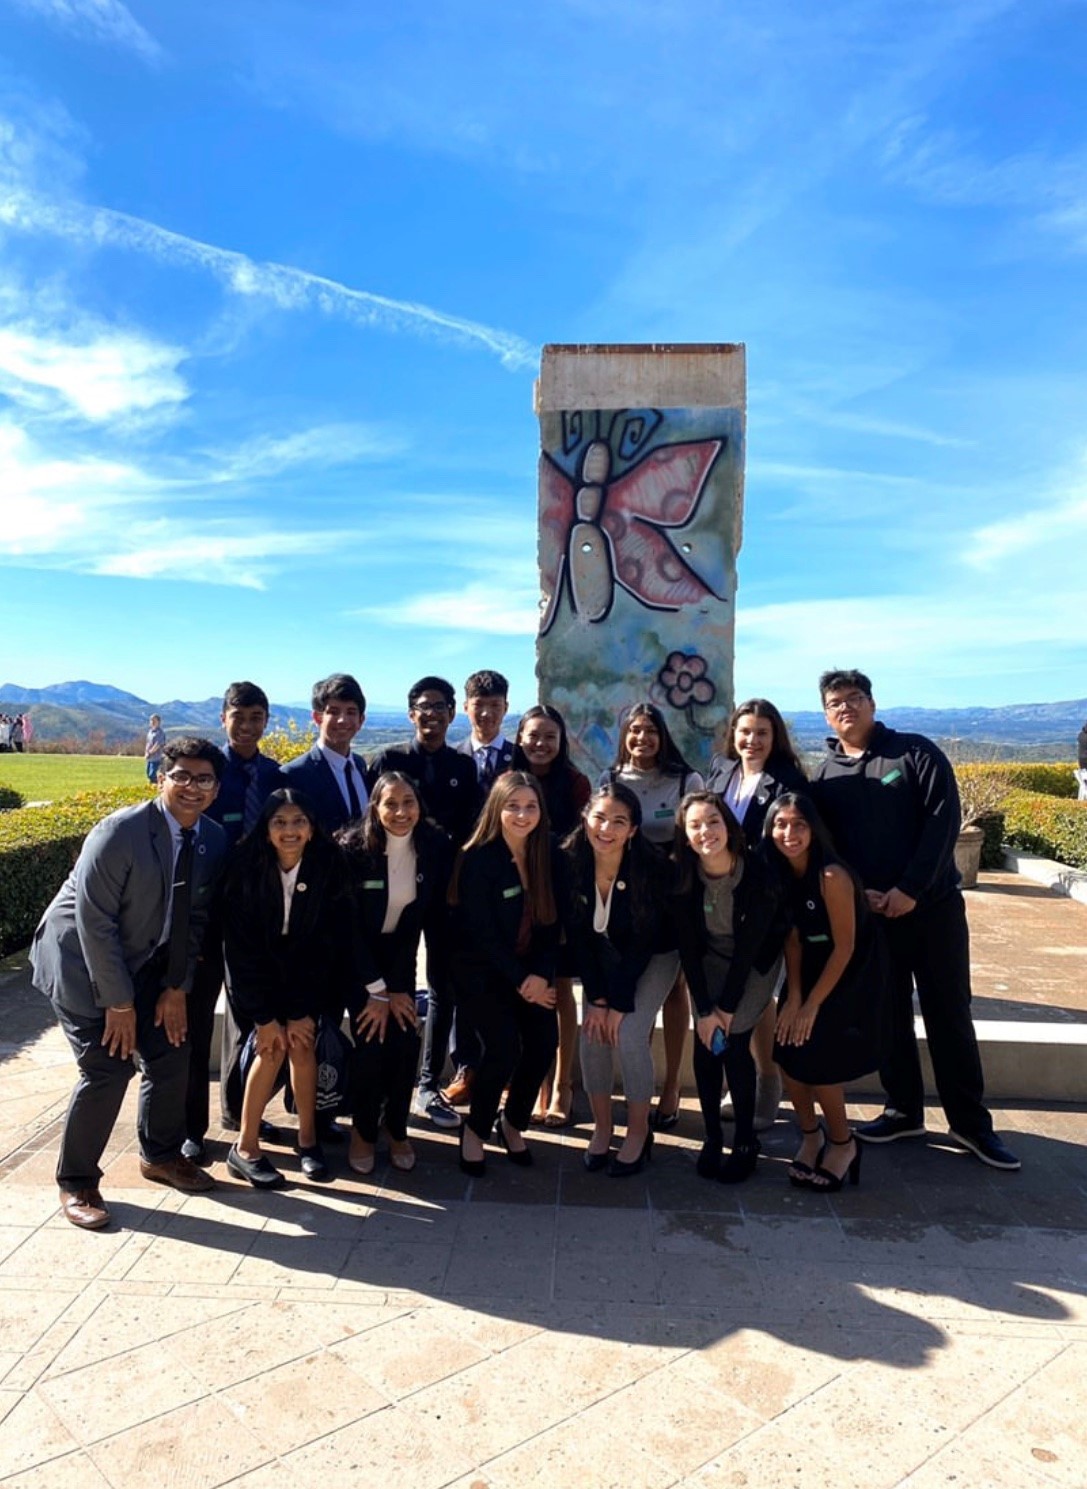 Youth Council standing in front of the Berlin Wall monument at the Ronald Reagan Presidential Library and Museum